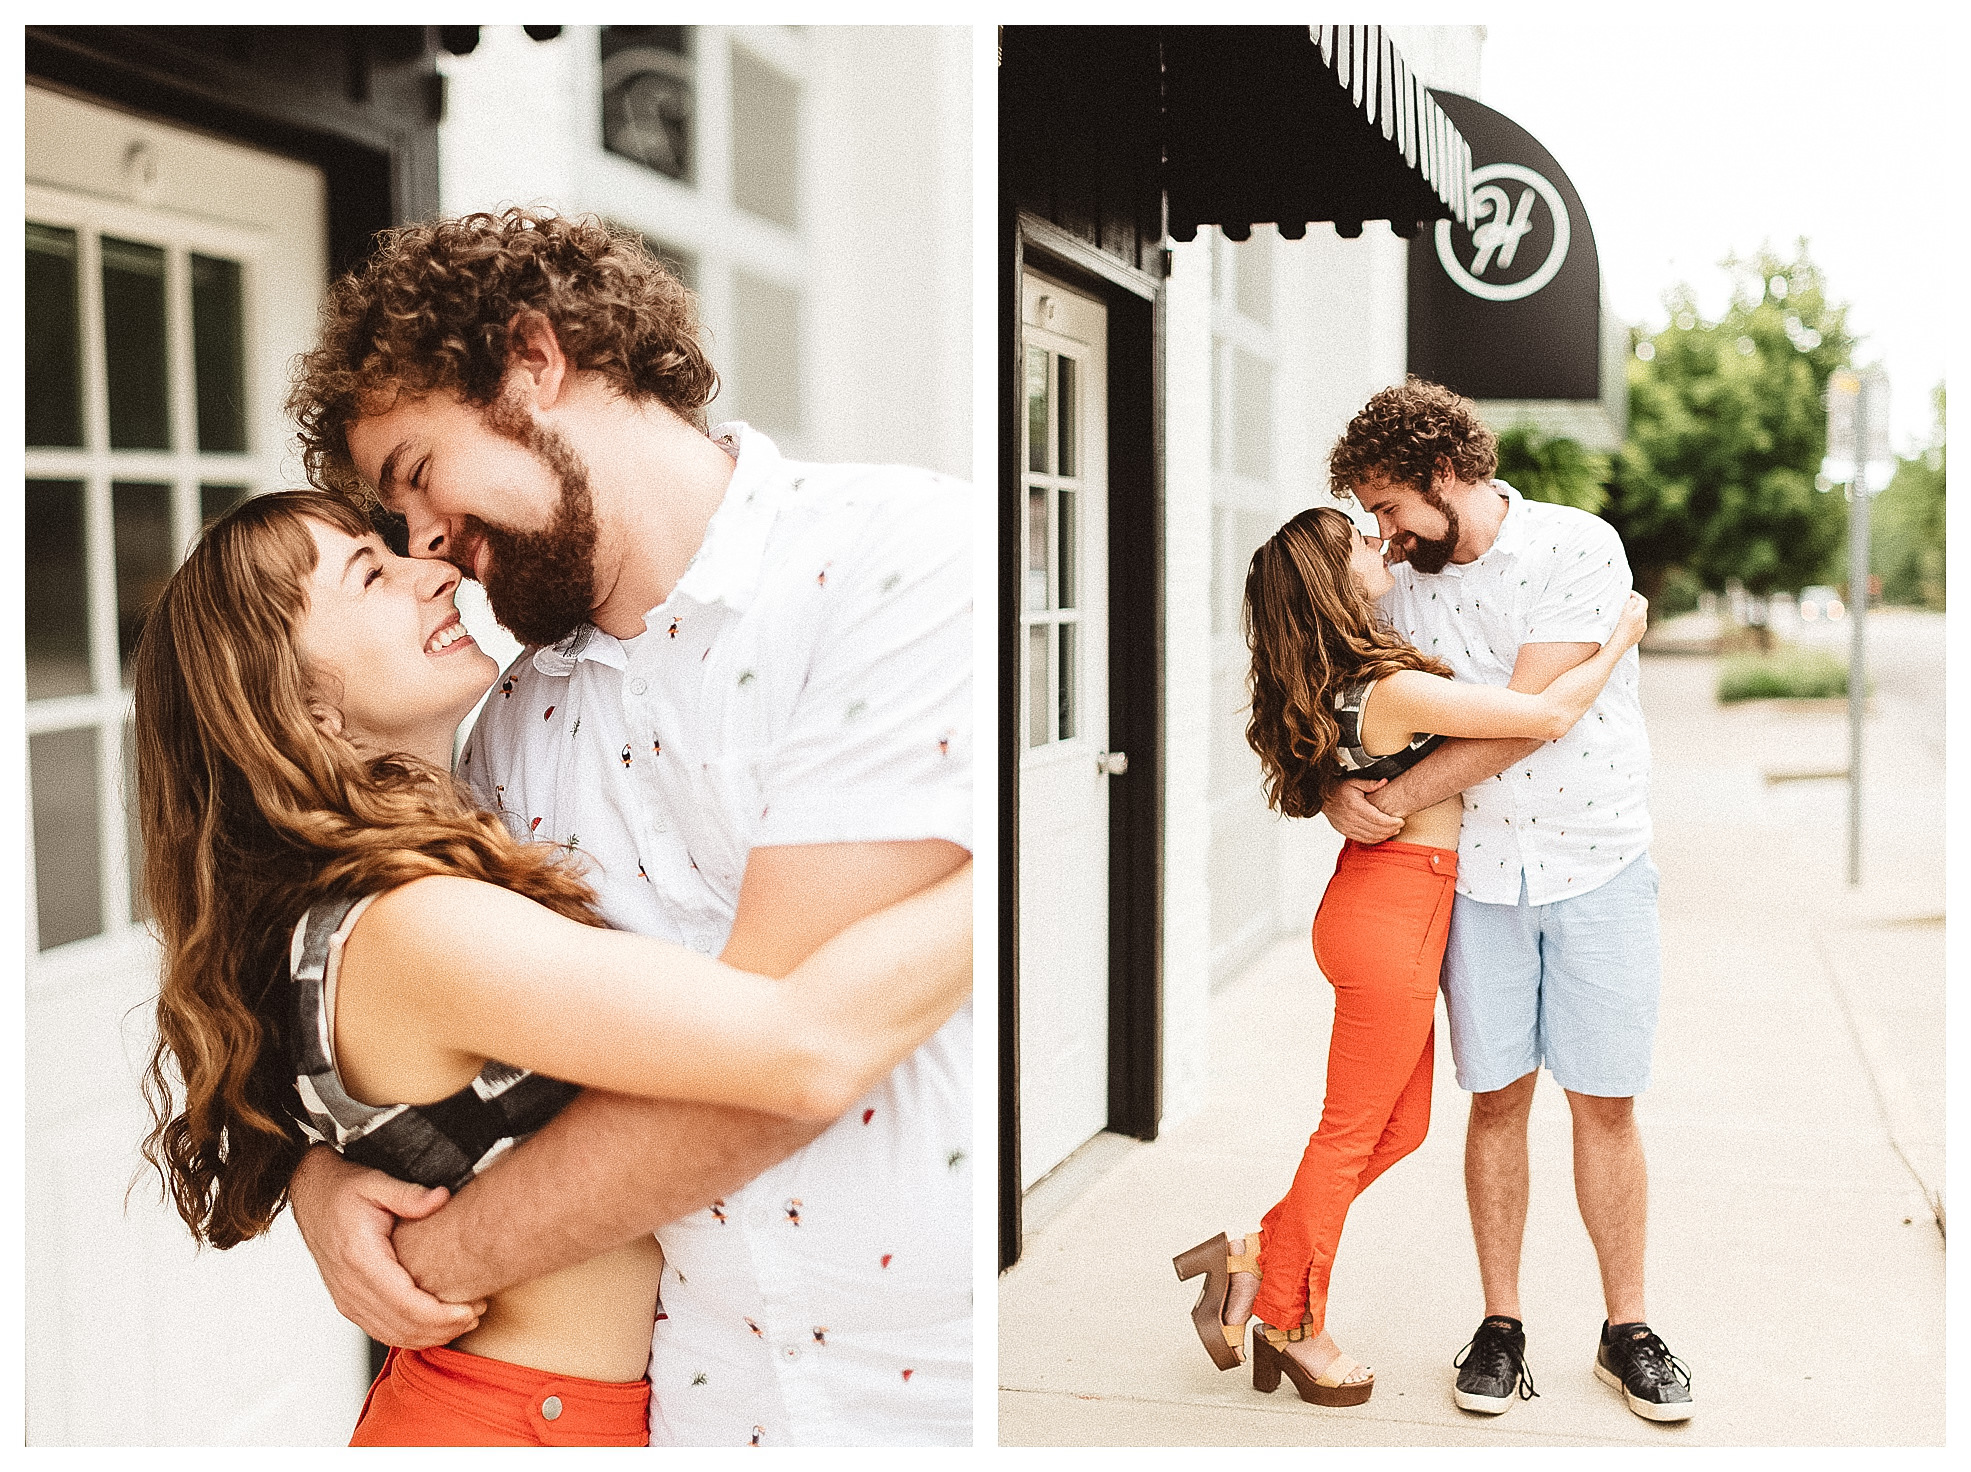 bloomington-antique-mall-engagement-courtney-sinclair-photography-26.jpg